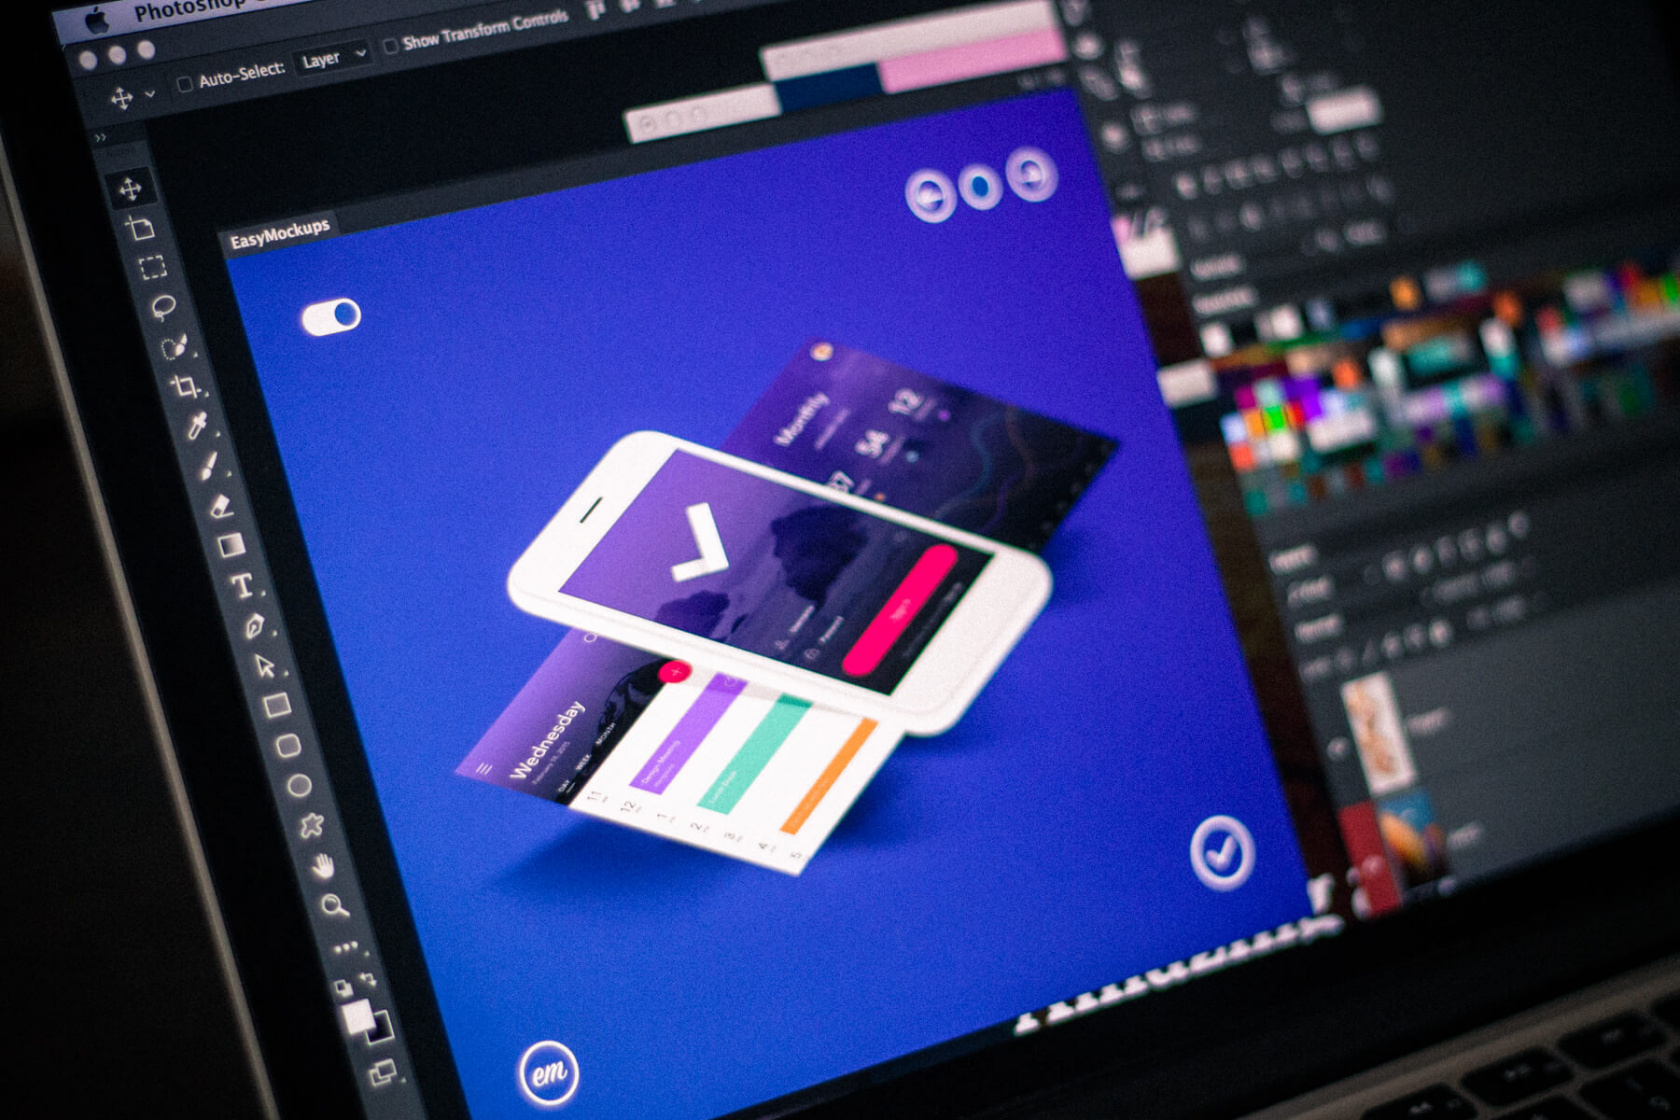 what photoshop plugins work with affinity photo